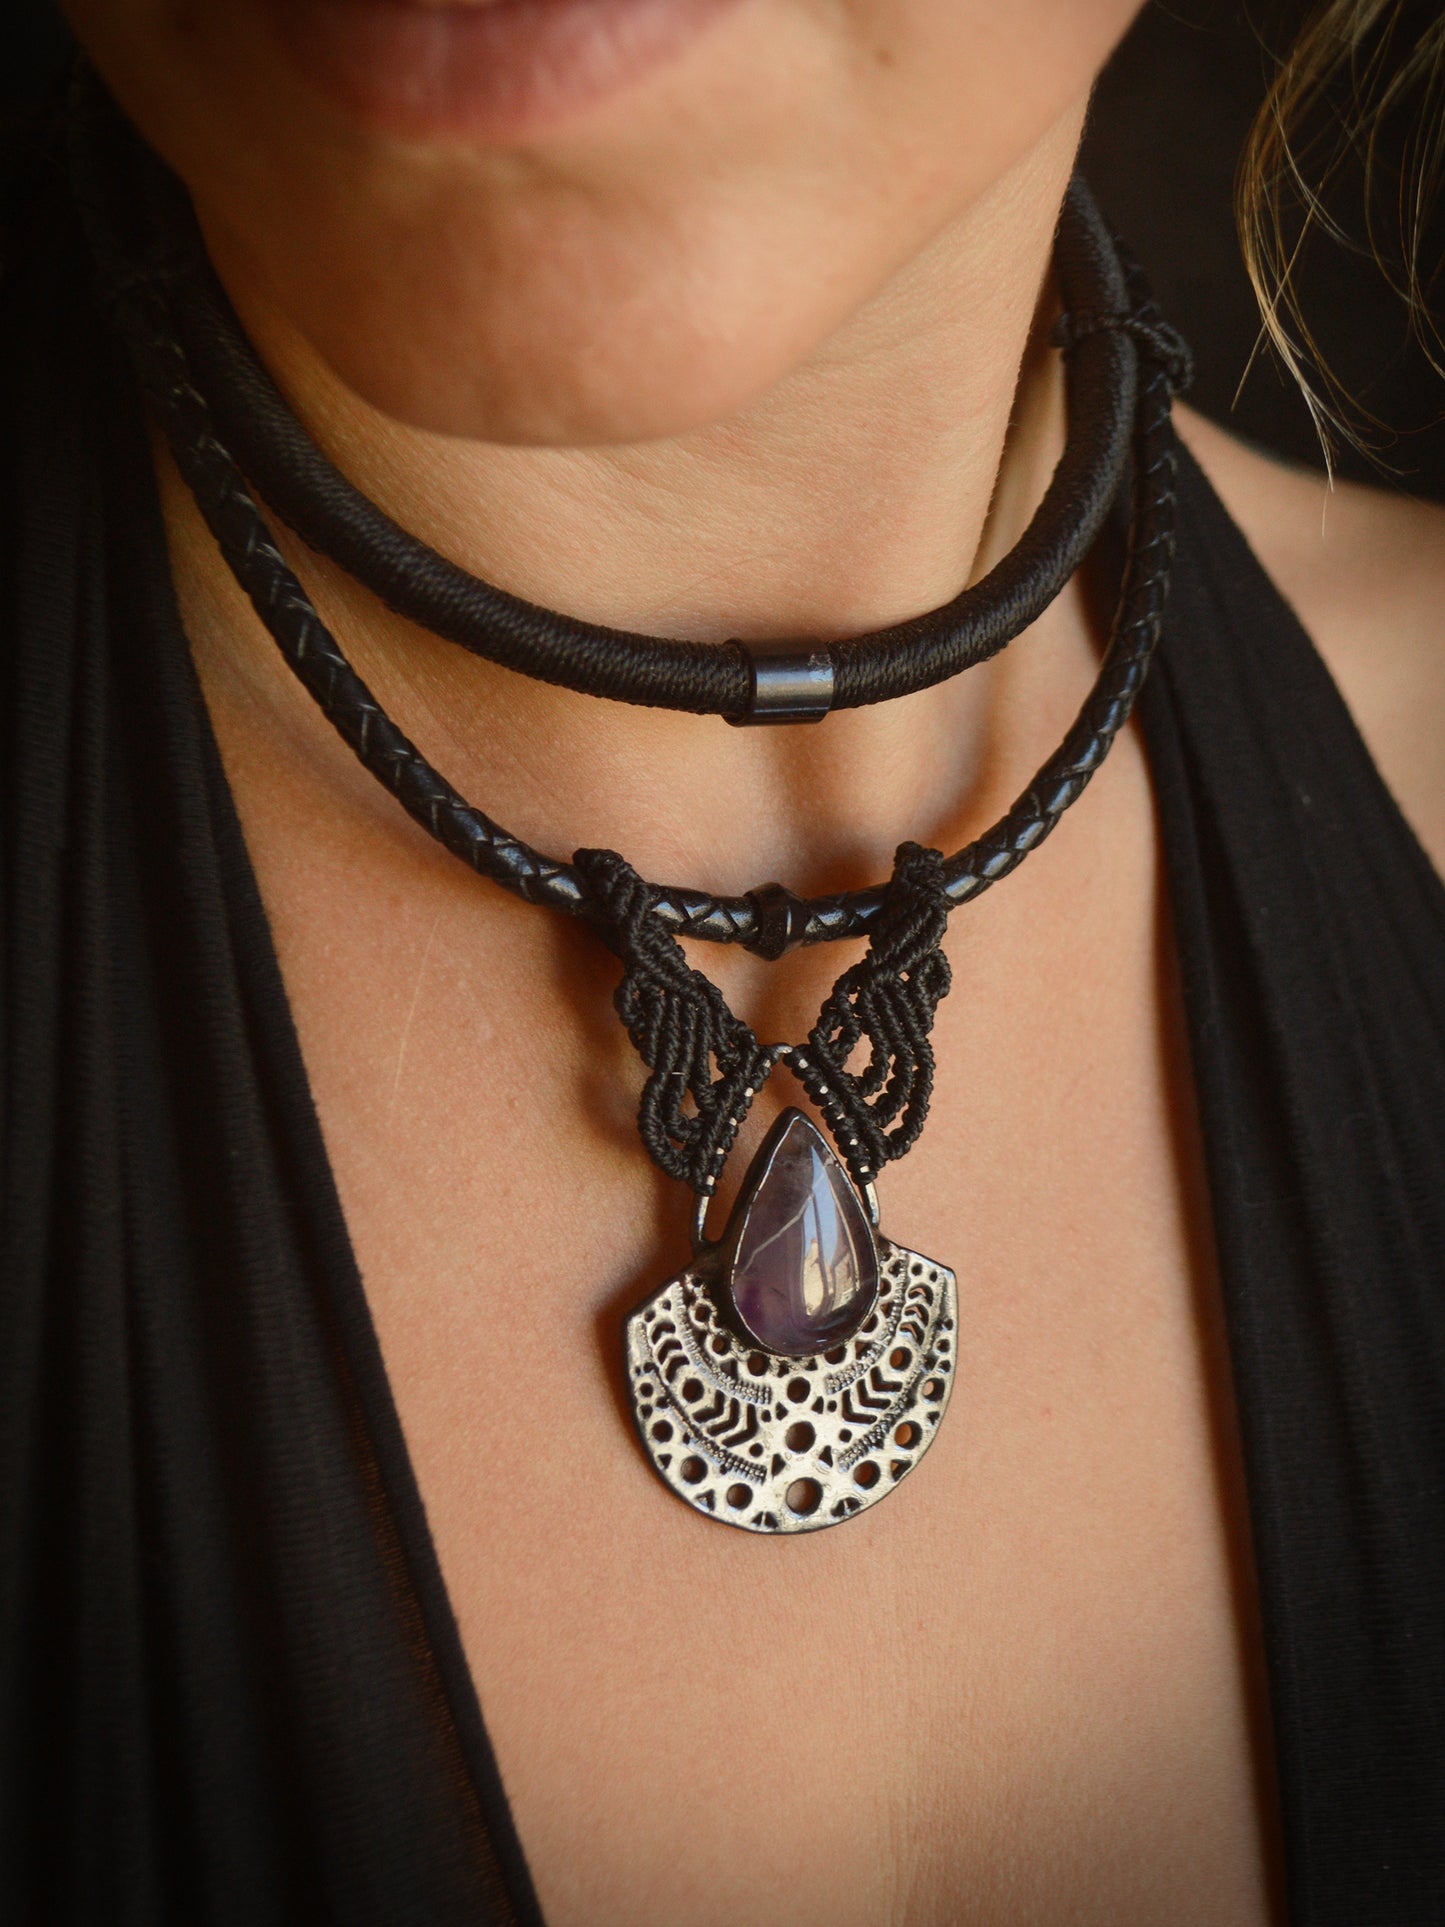 Total black amethyst electroformed pendant on macrame and leather torque necklace